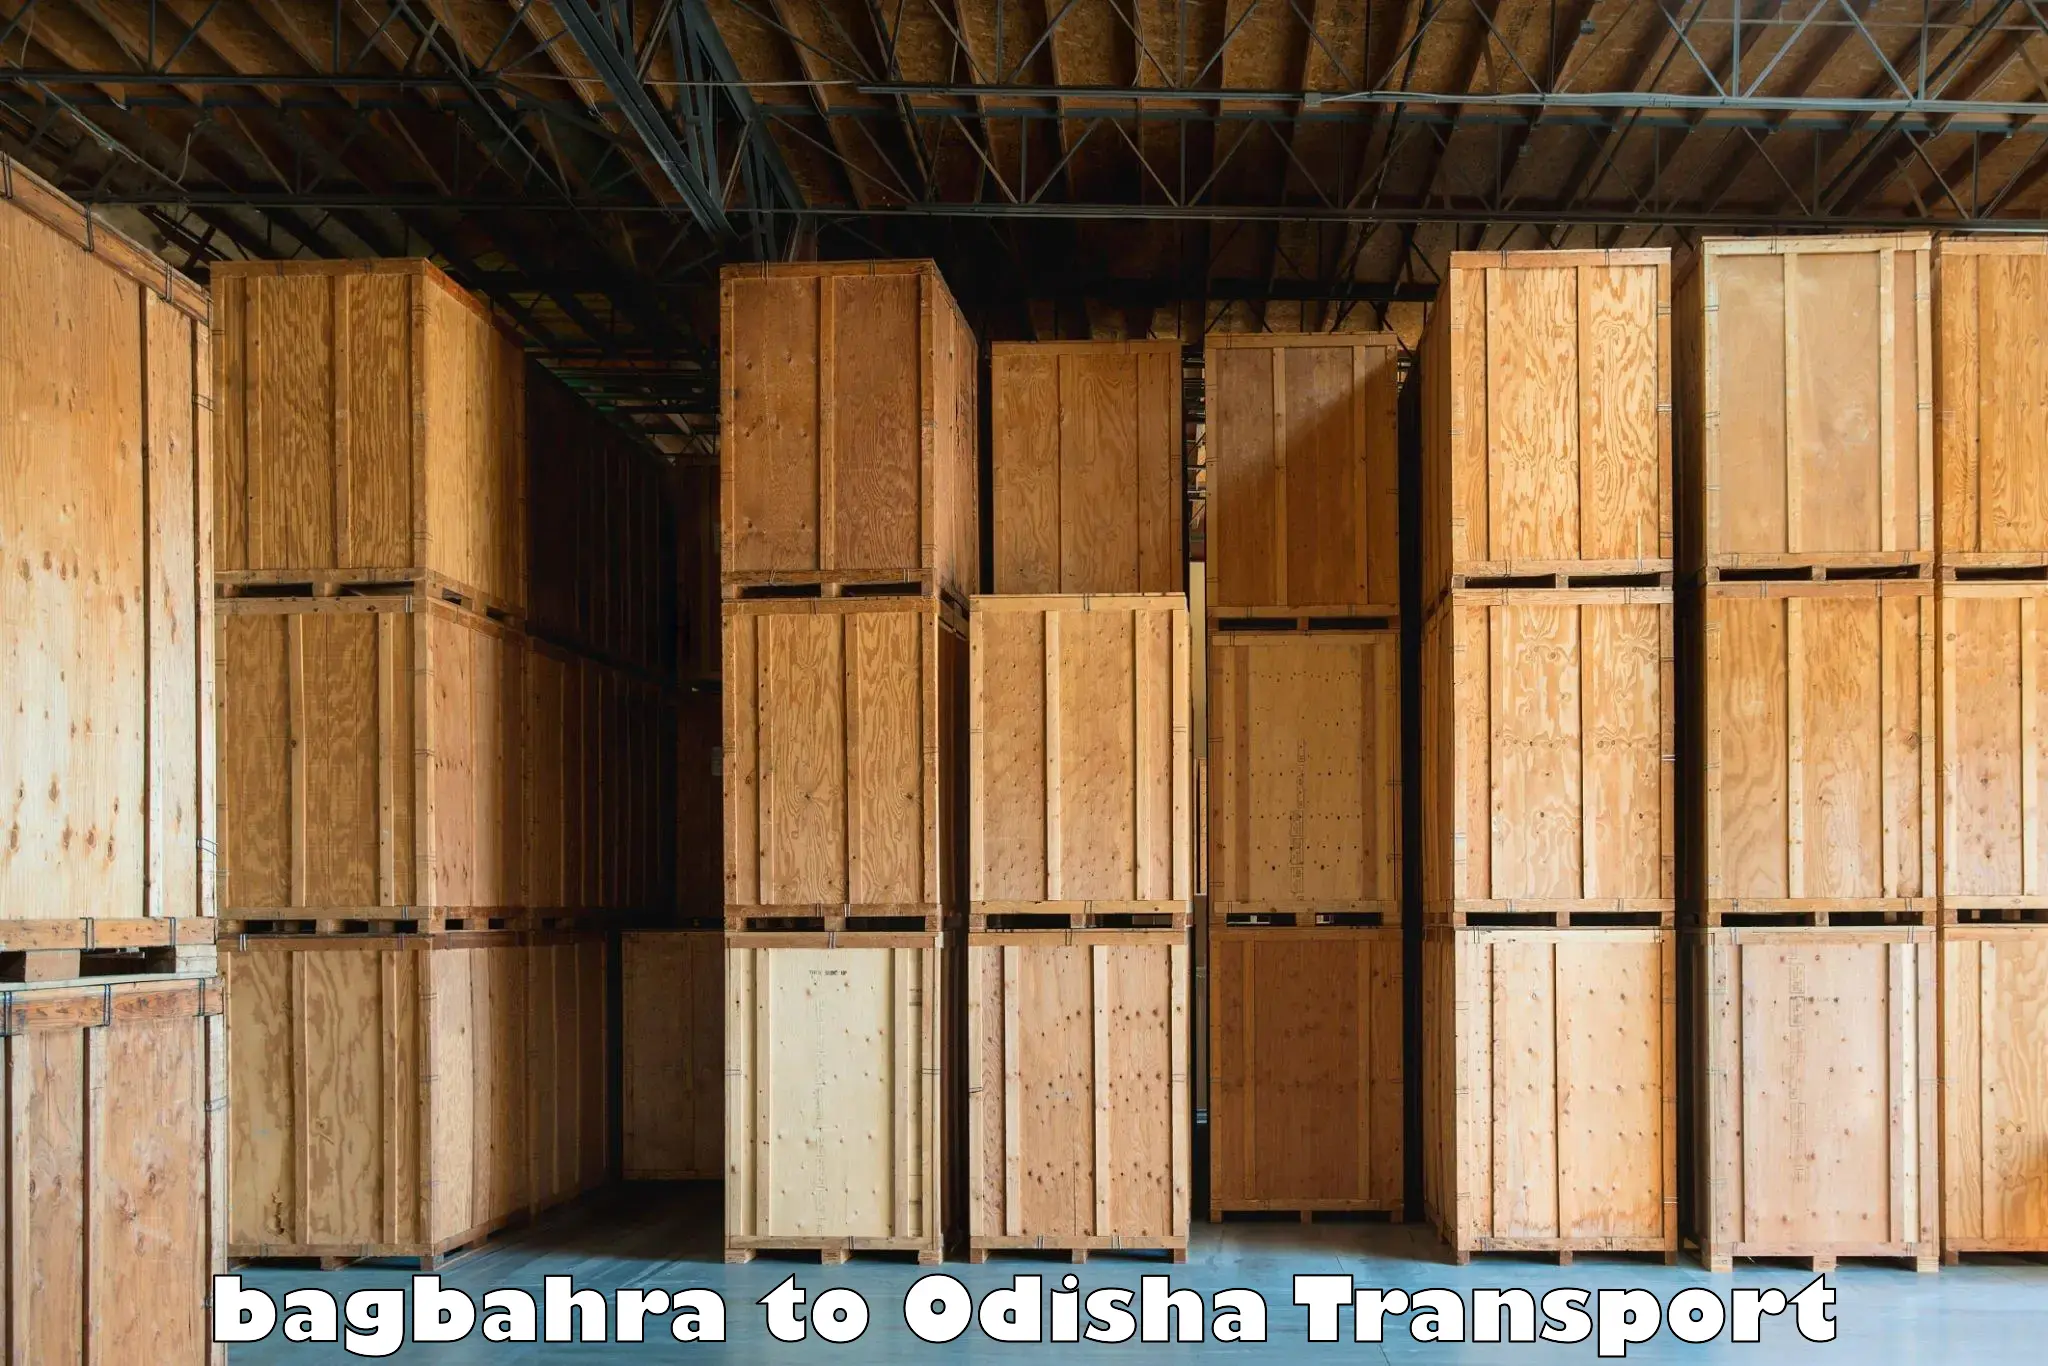 Transport shared services in bagbahra to Kadobahal